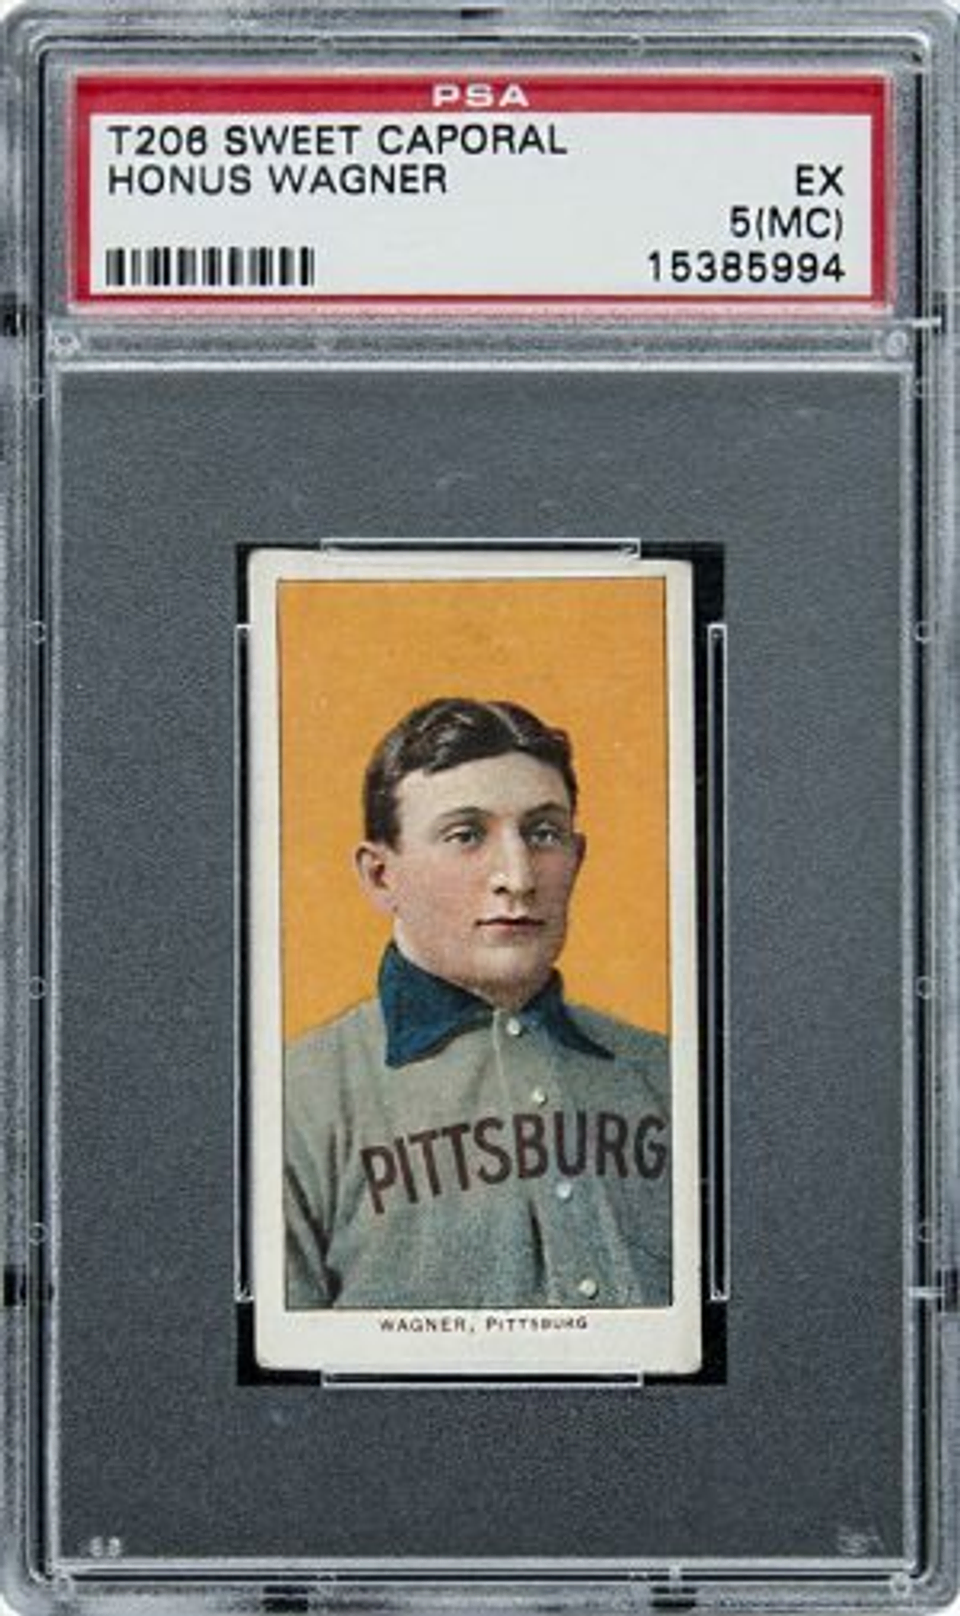 One of the world's most valuable baseball cards featuring shortstop and Freemason Honus Wagner